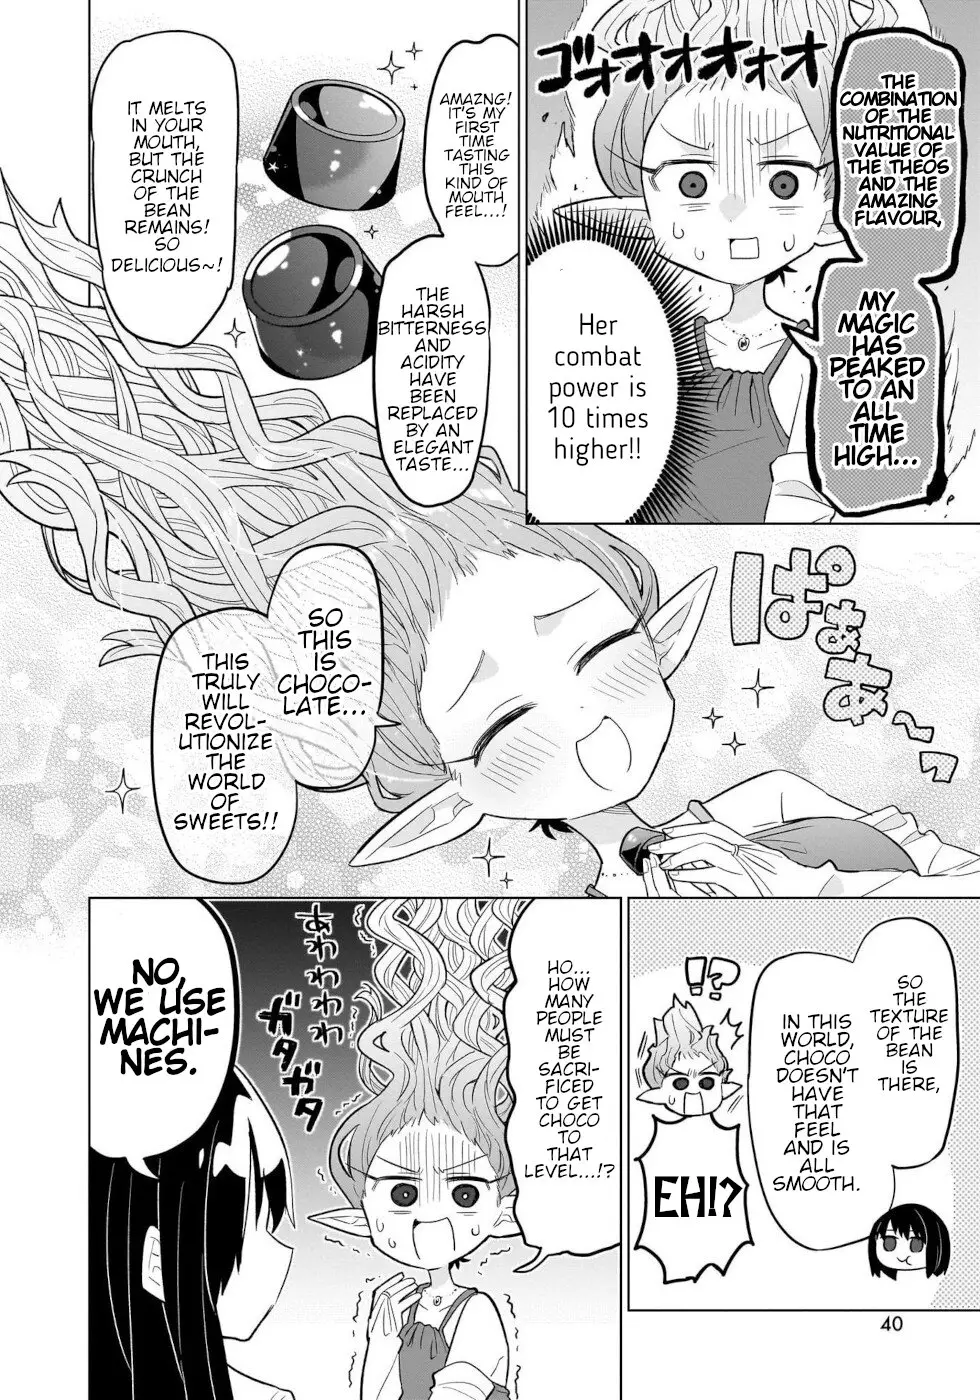 Sweets, Elf, And A High School Girl - 7 page 14-41aa69b9